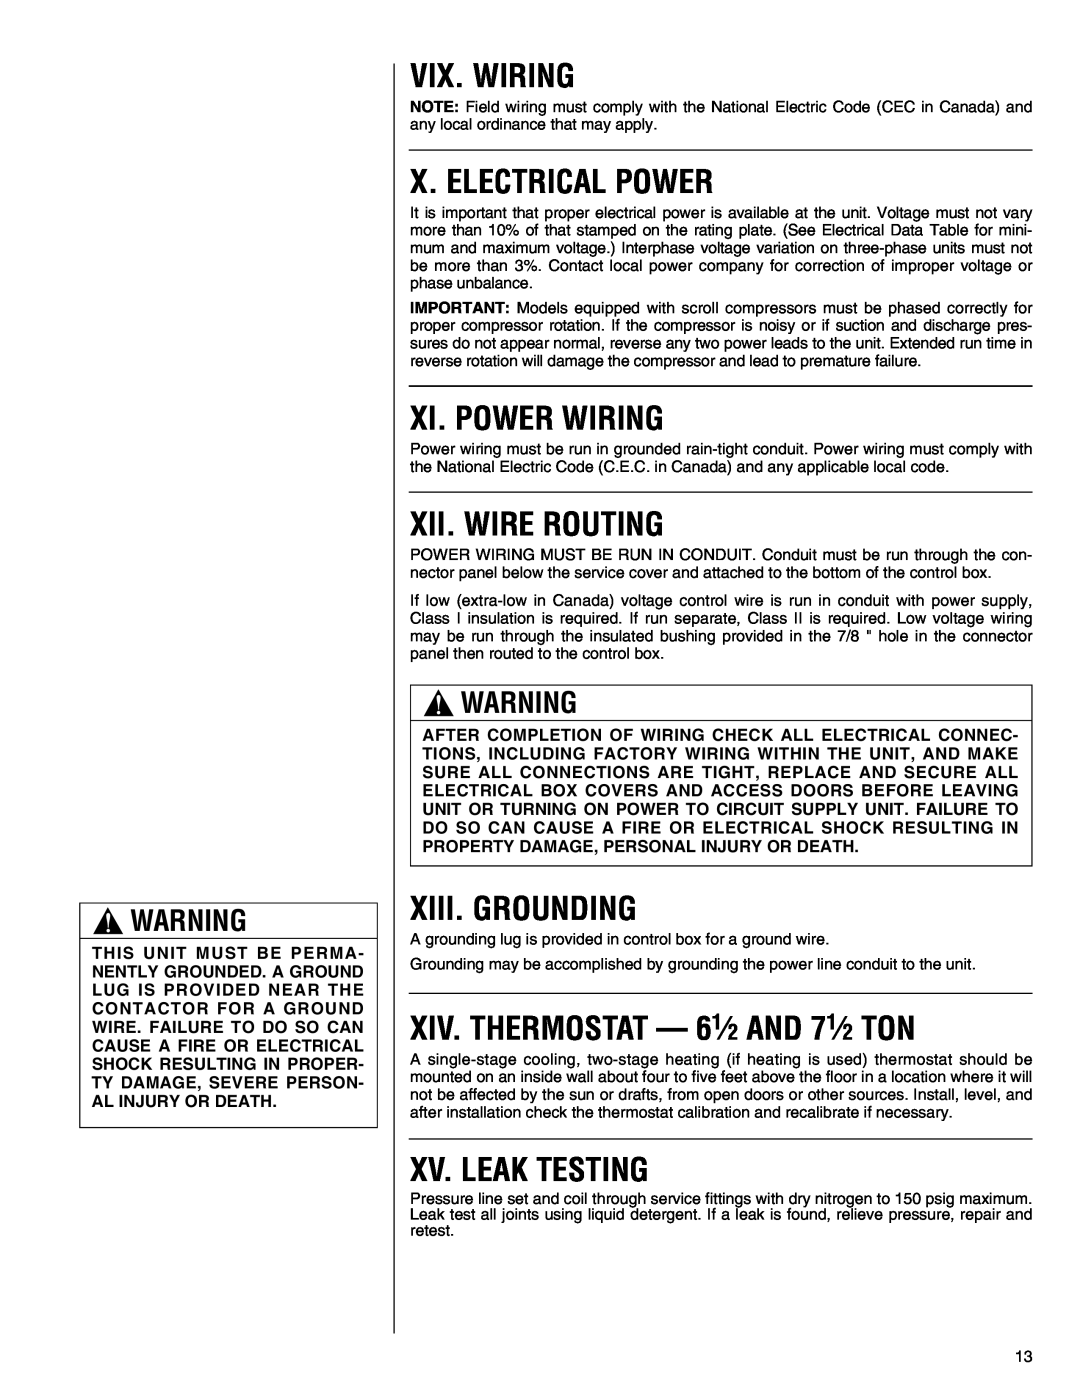 Heat Controller R-410A Vix. Wiring, X. Electrical Power, Xi. Power Wiring, Xii. Wire Routing, Xiii. Grounding 